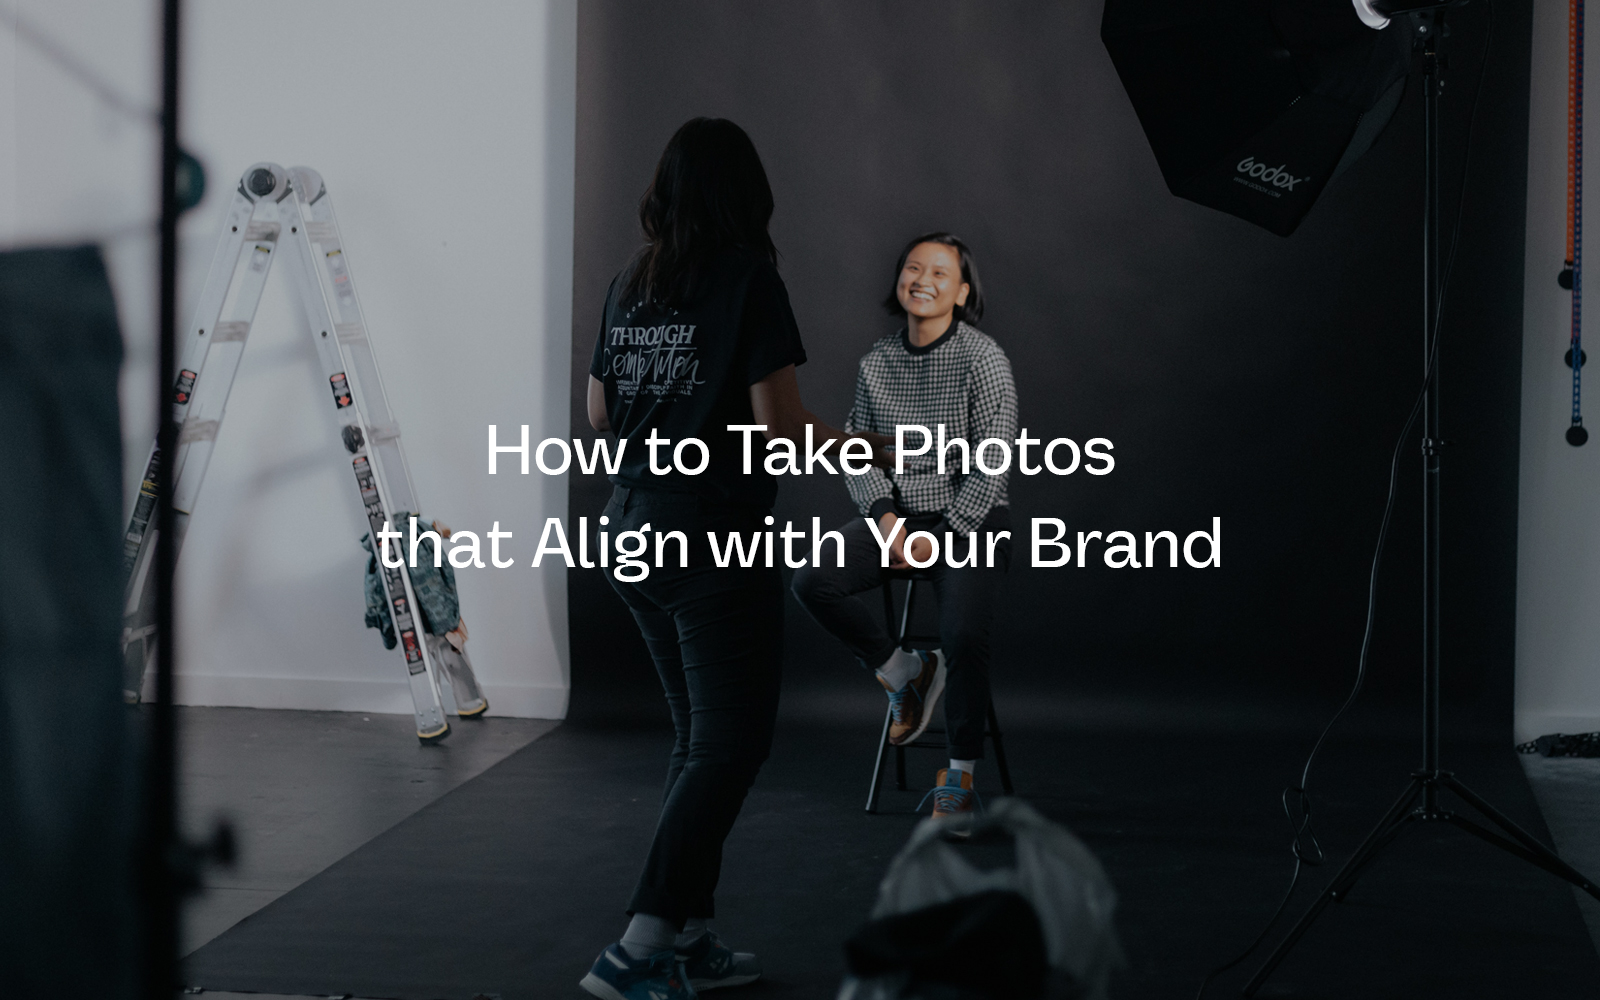 Two women on set in a photo studio working on brand photos for their small business.